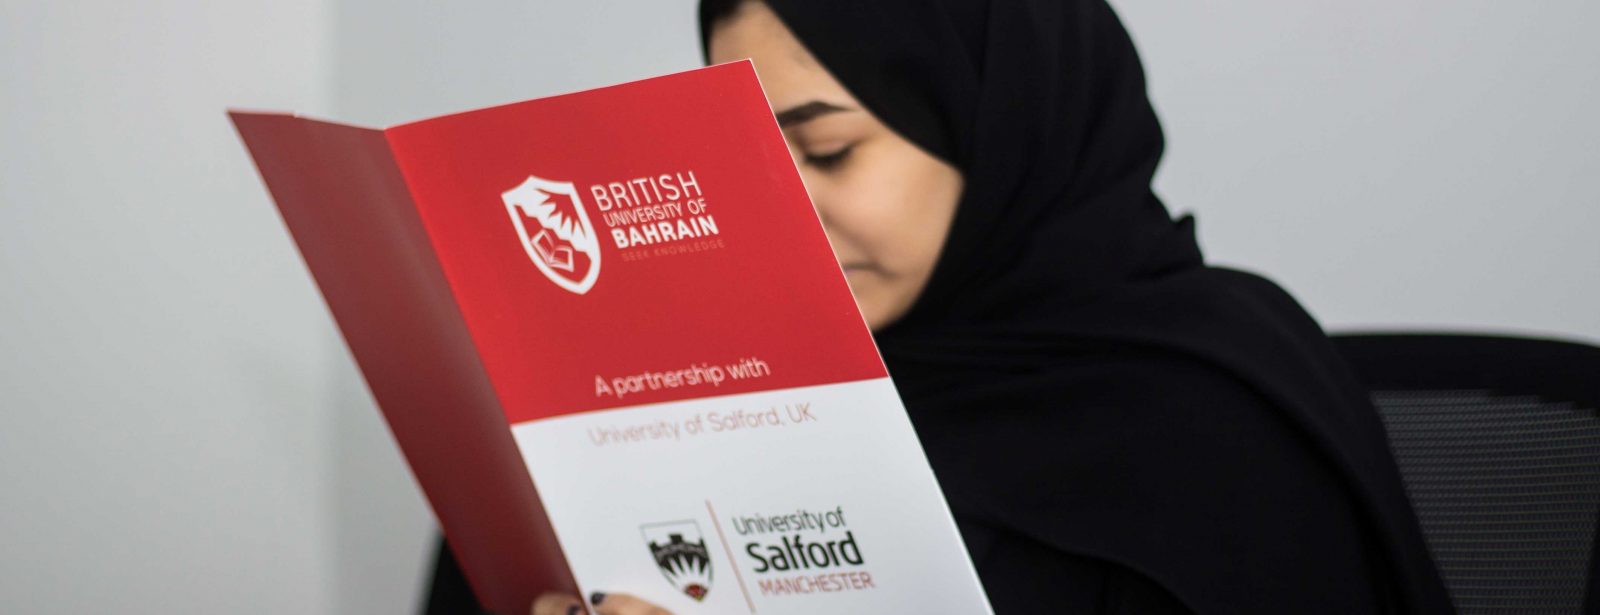 Welcome to your future at the British University of Bahrain #SeekKnowledge, study UK Interior Design and our new UK Architecture Bachelor Degree courses at BUB.